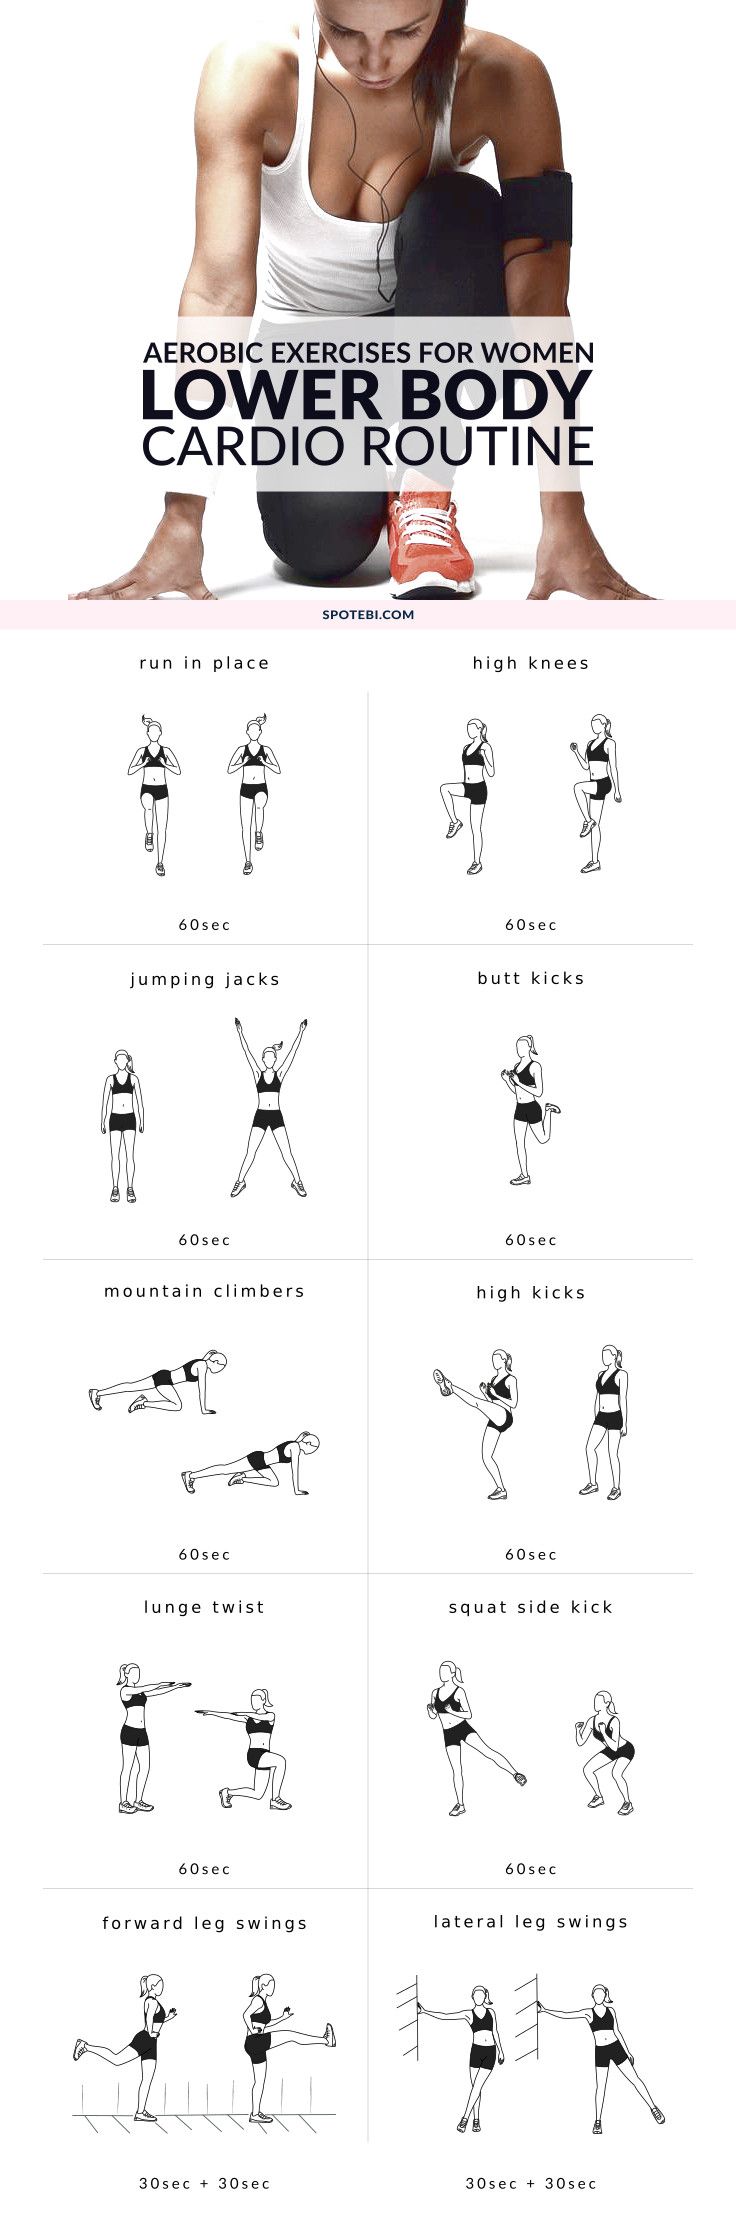 Workout At Home No Equipment Lower Body Warm Up Exercises Fitnessviral Magazine Your Number One Source For Daily Health And Fitness Motivation